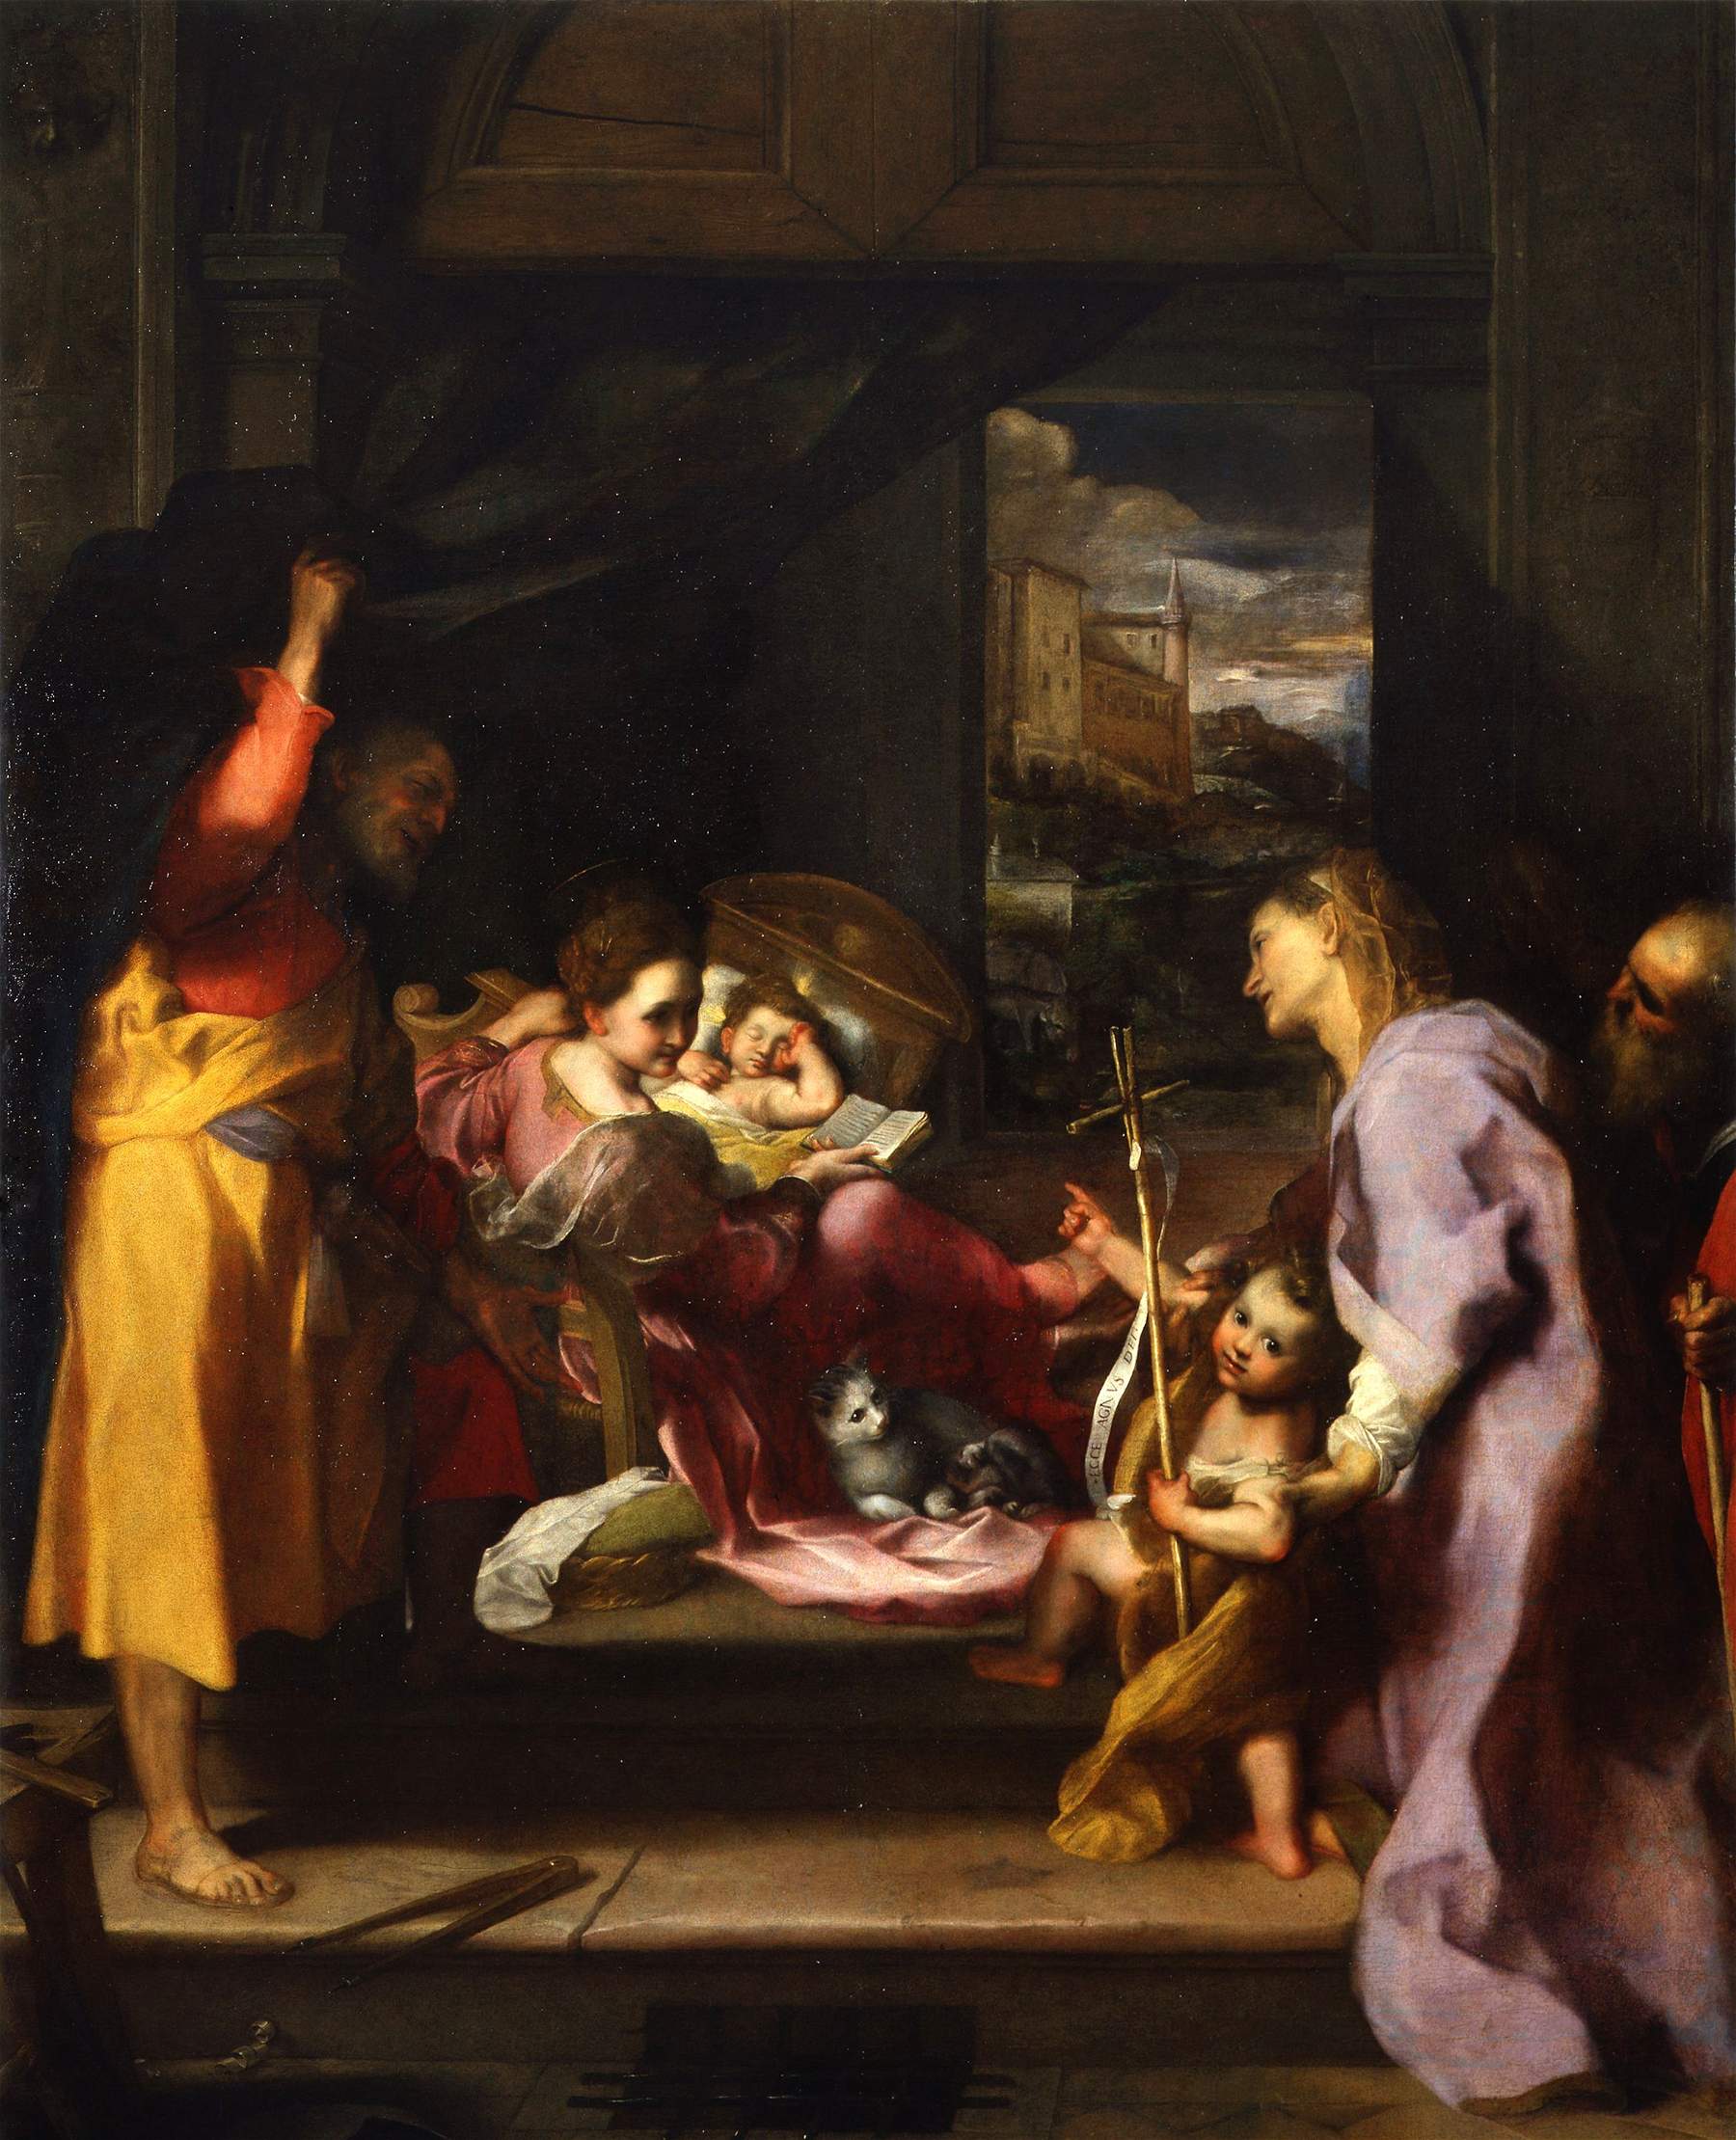 The Madonna of the Cat, a masterpiece by Federico Barocci, leaves Uffizi storerooms and returns to view